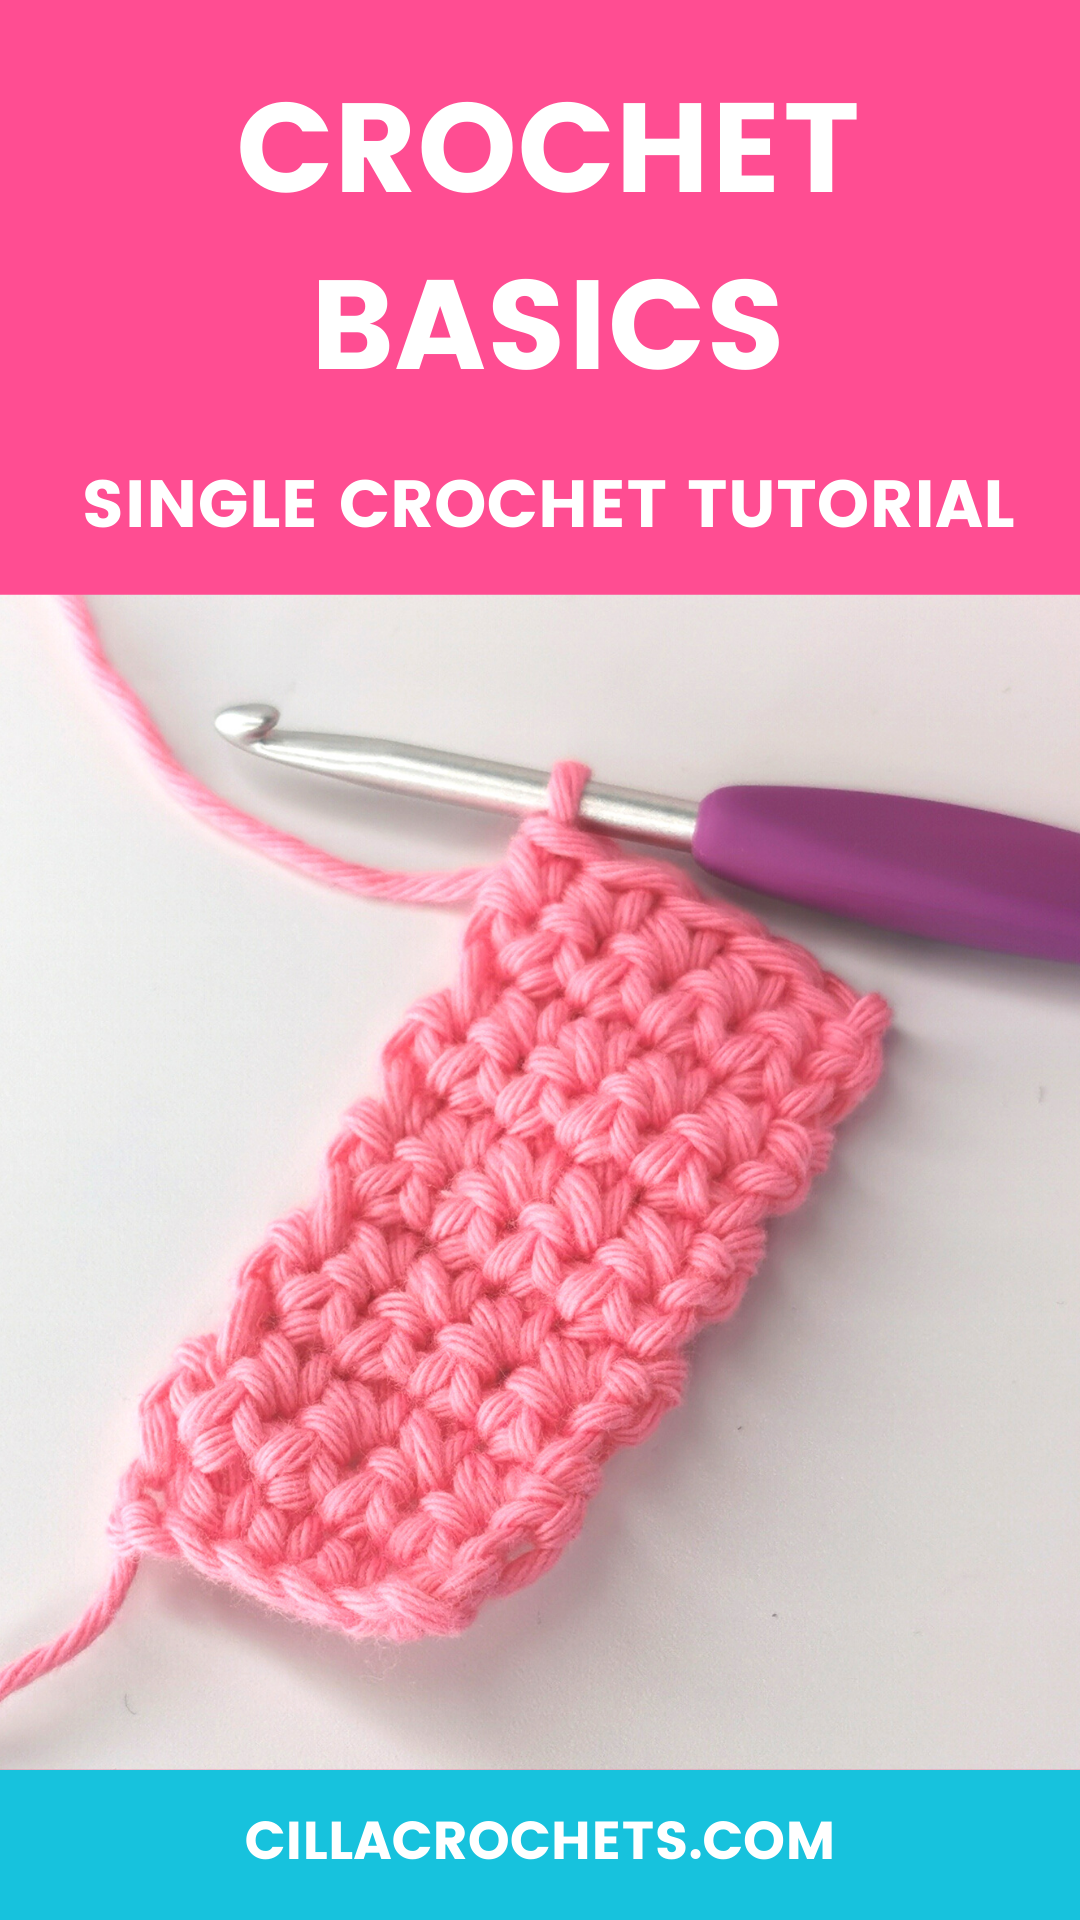 hook style and pattern  Crochet stitches tutorial, Learn to crochet,  Crochet